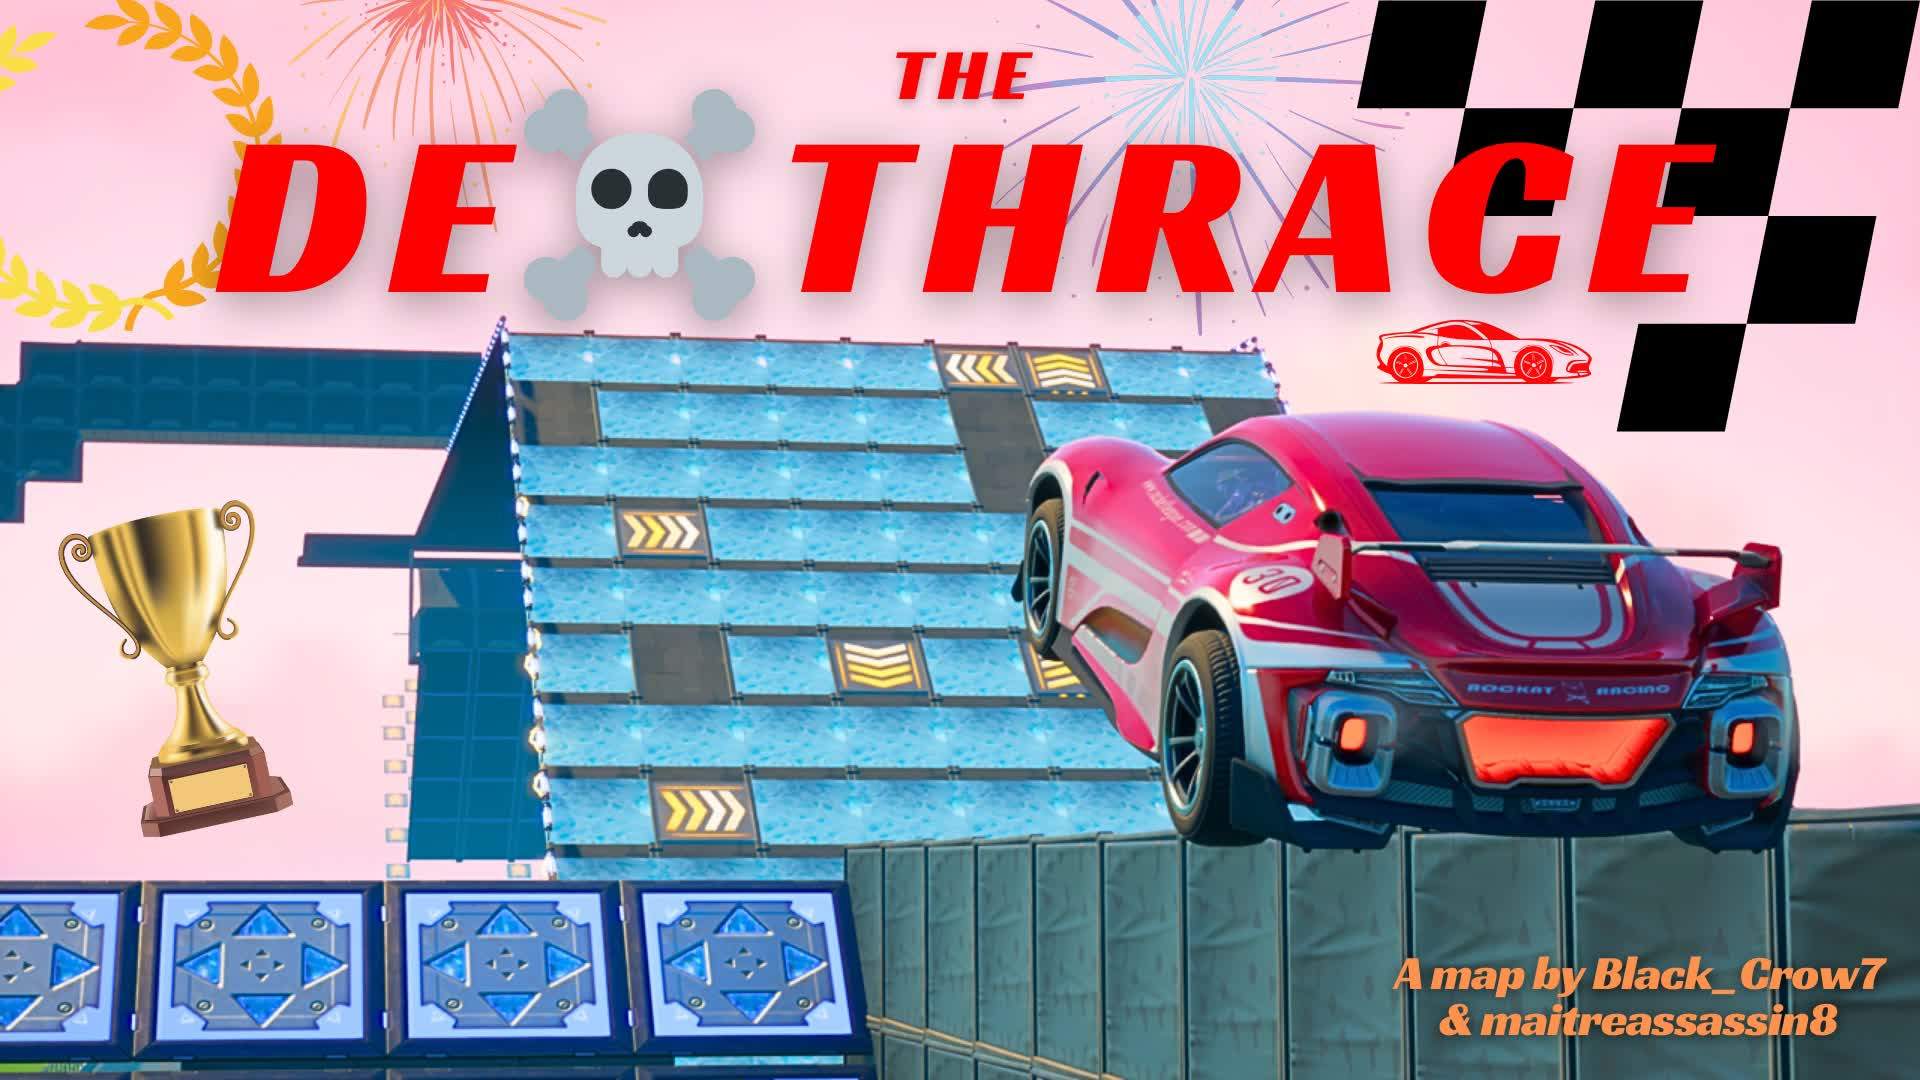 THE DEATHRACE